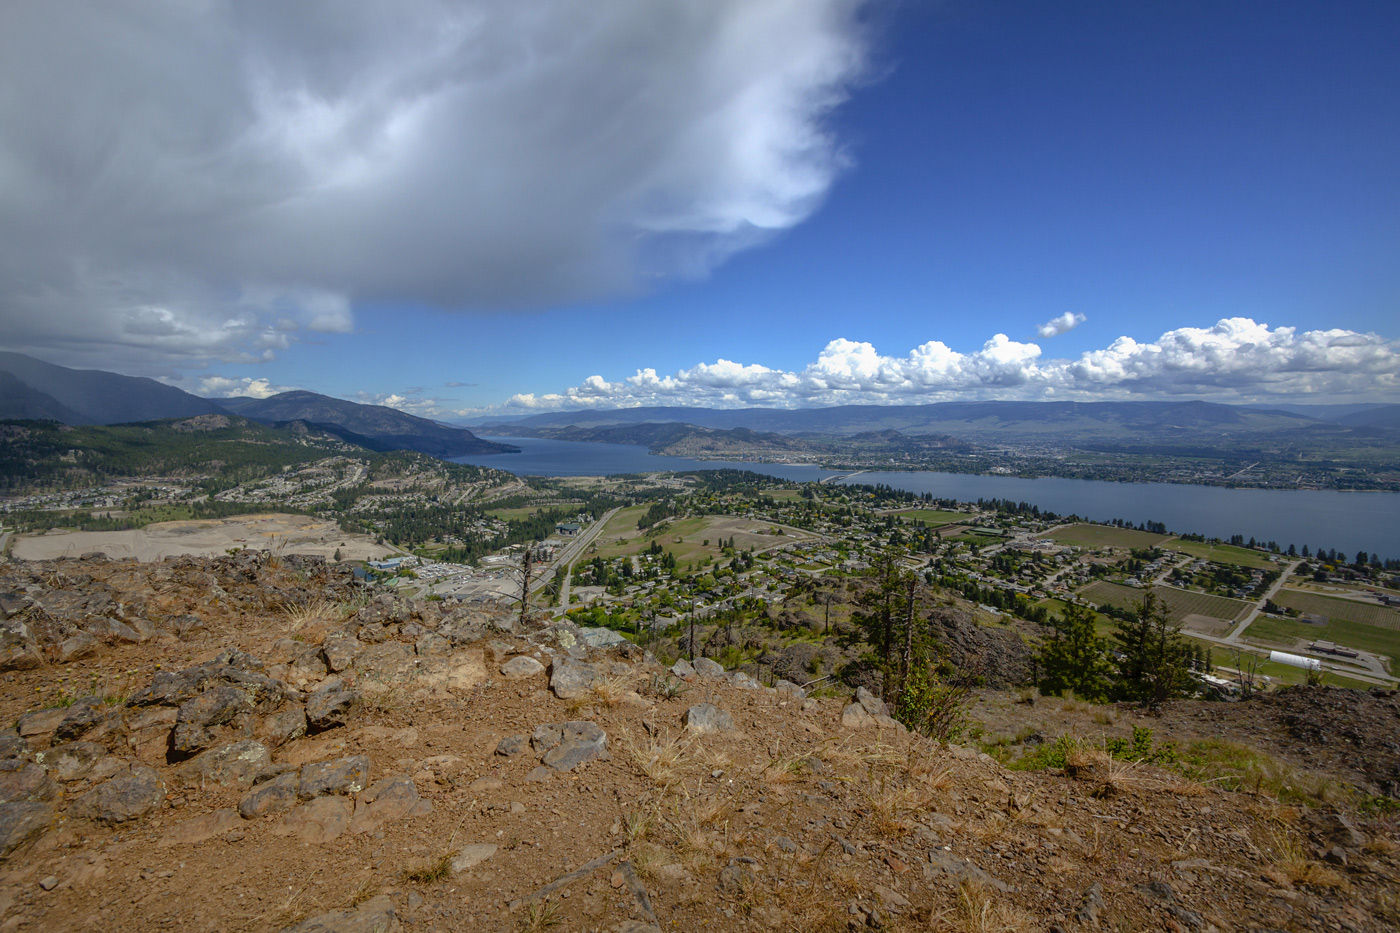 Take in the views from the top of Mount Boucherie, one of the many hikes offering spectacular views near the Comfort Suites’ Kelowna accommodations.